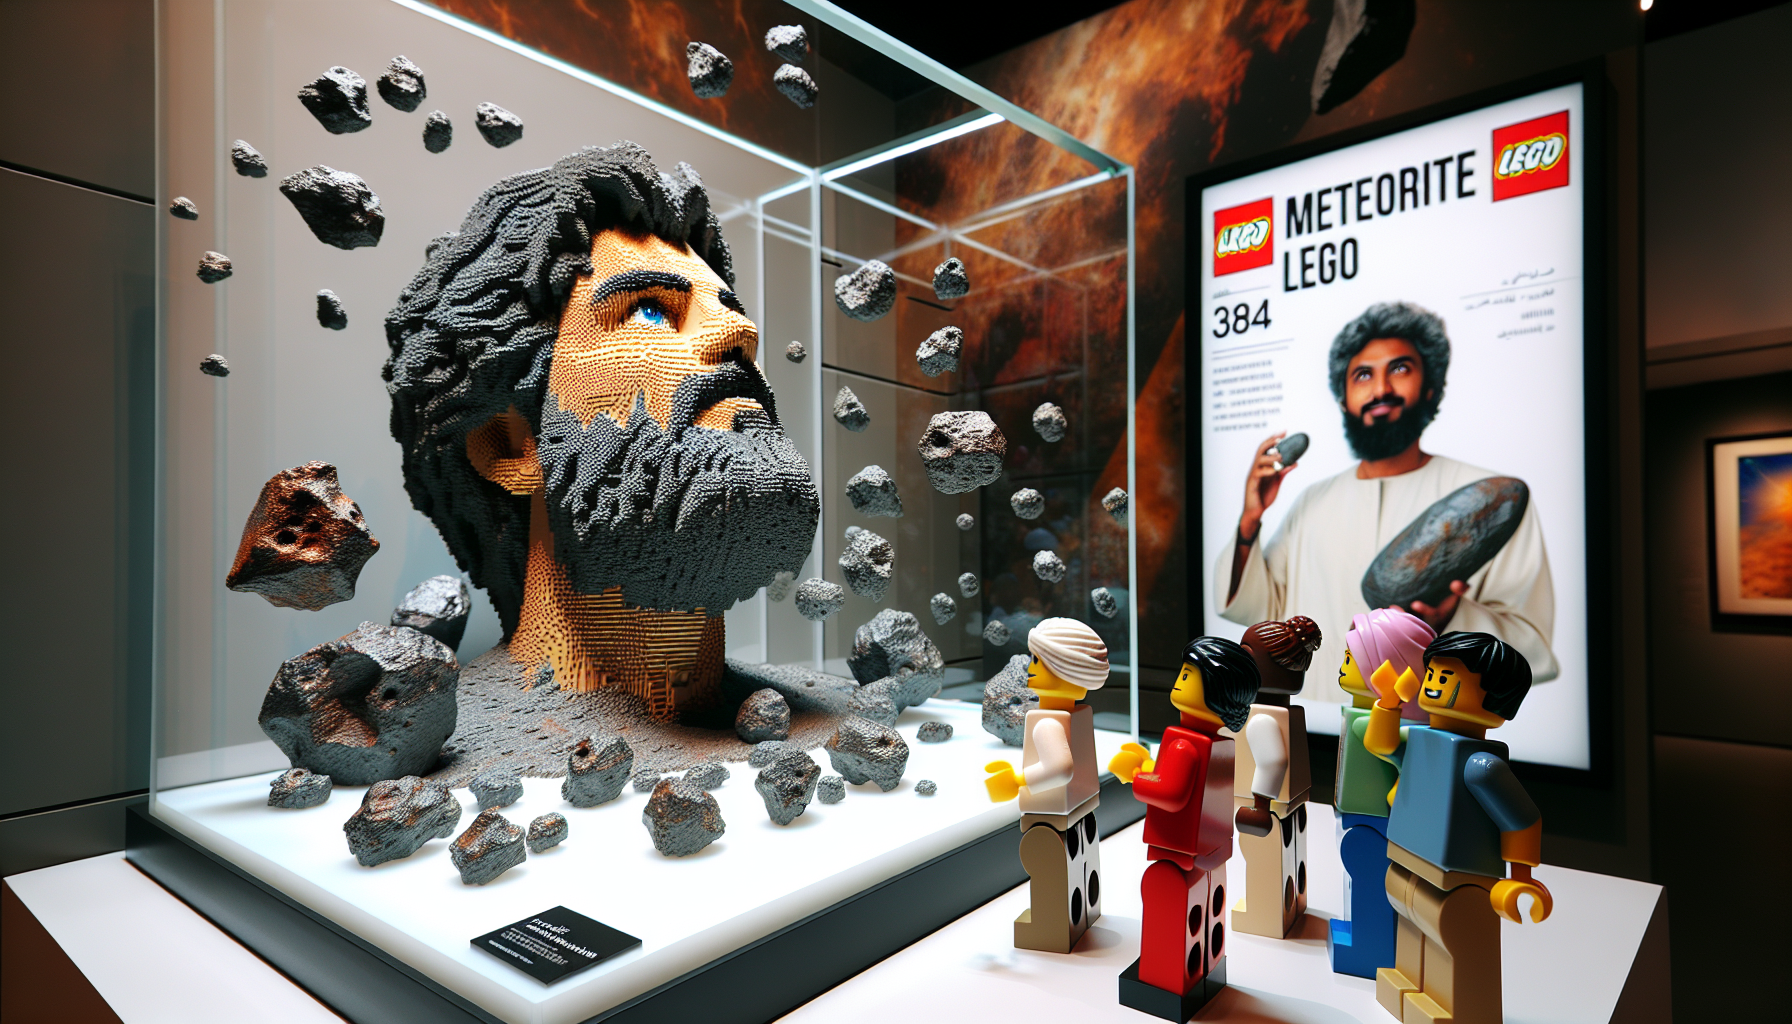 Lego Reveals Blocks Made from Meteorite Particles, Now Displayed in Select Locations